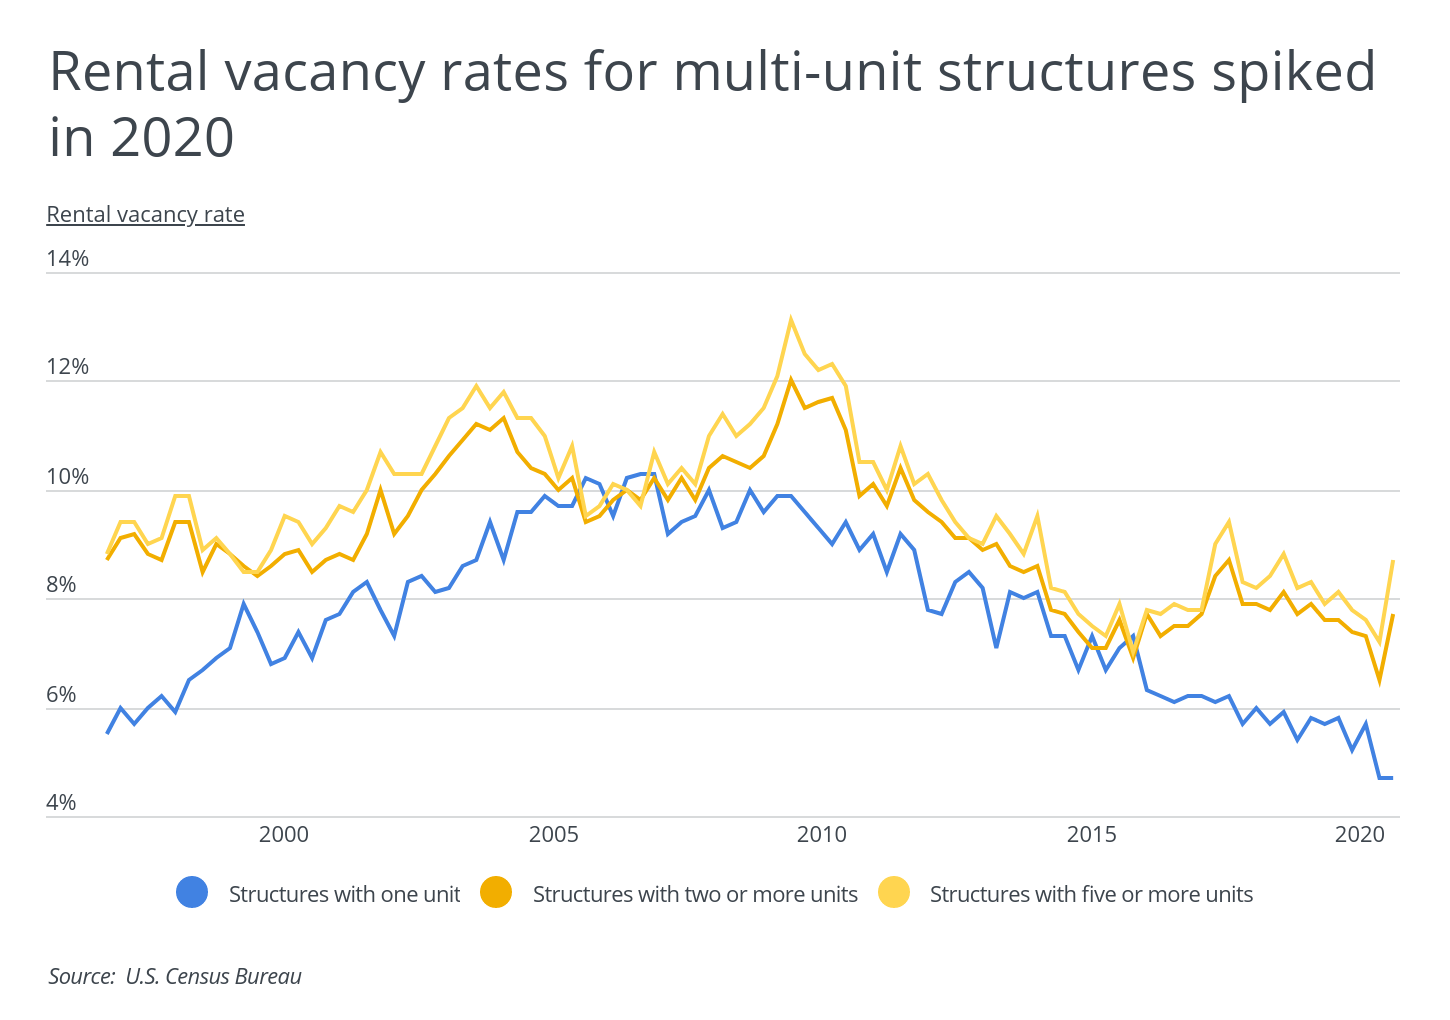 Cities With the Highest (and Lowest) Rental Vacancy Rates